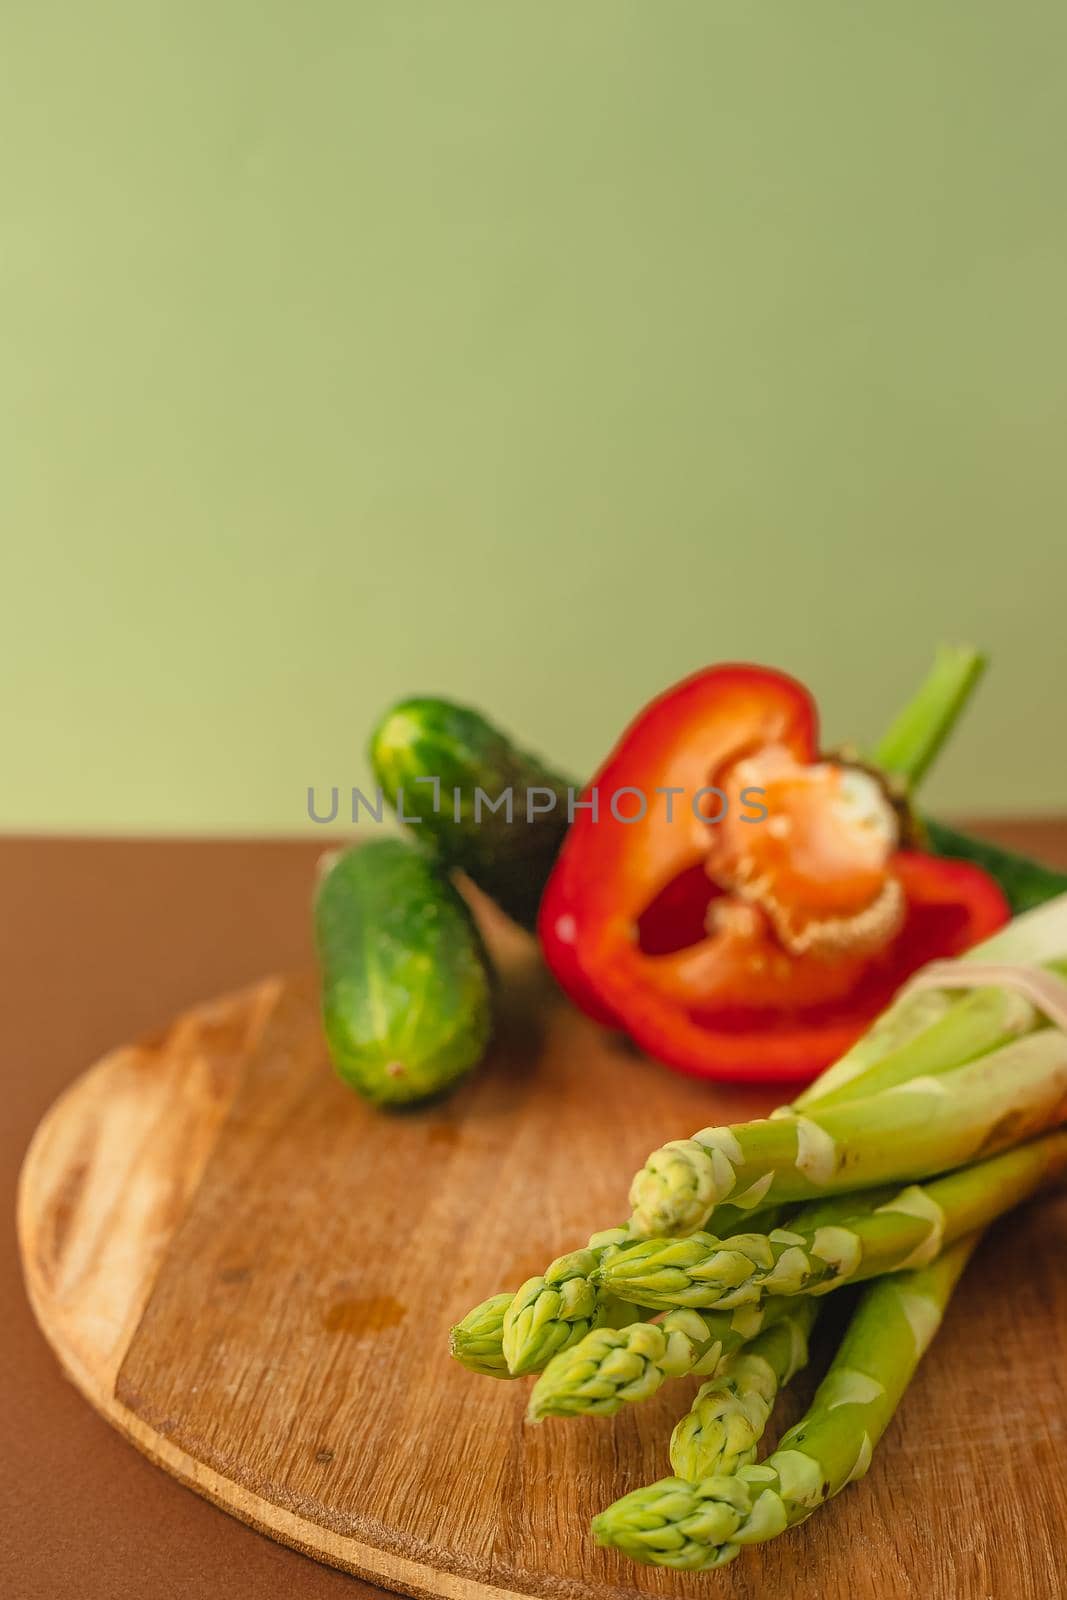 Vegetables lie on a wooden board: tomatoes, asparagus, cucumbers, red bell peppers. brown, light green background. place for text